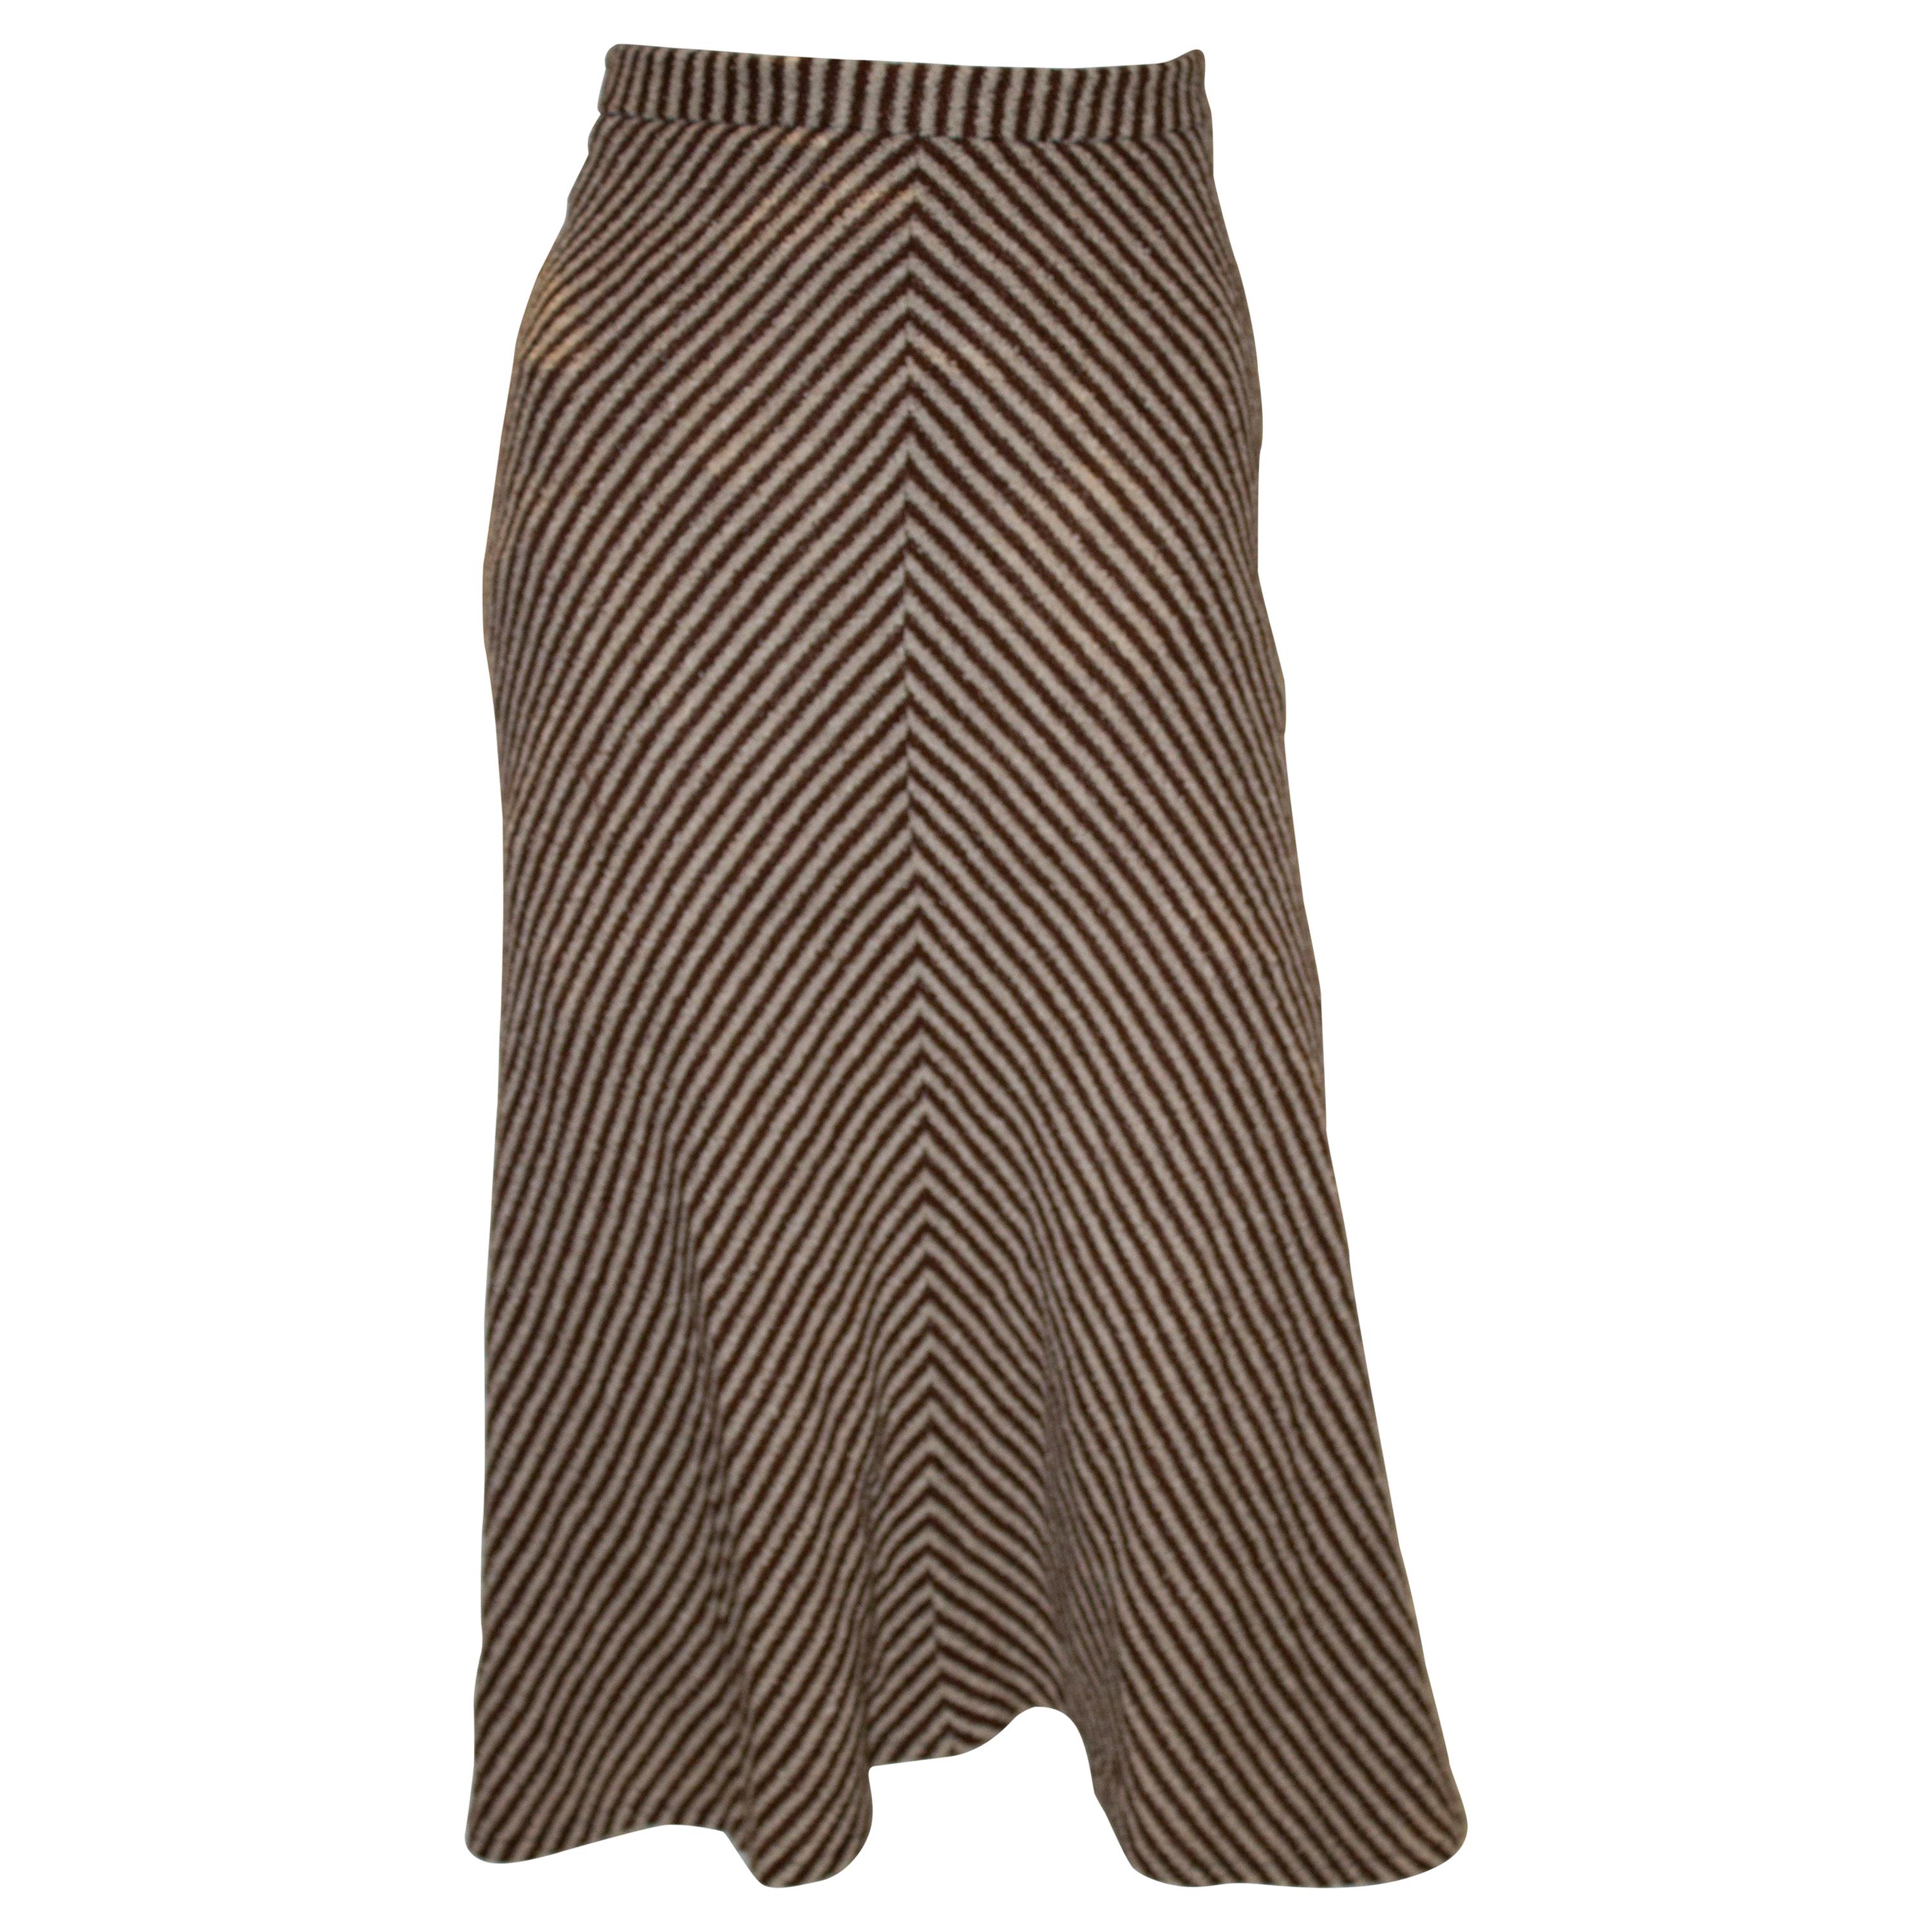 Vintage Brown and White Stripe Skirt For Sale